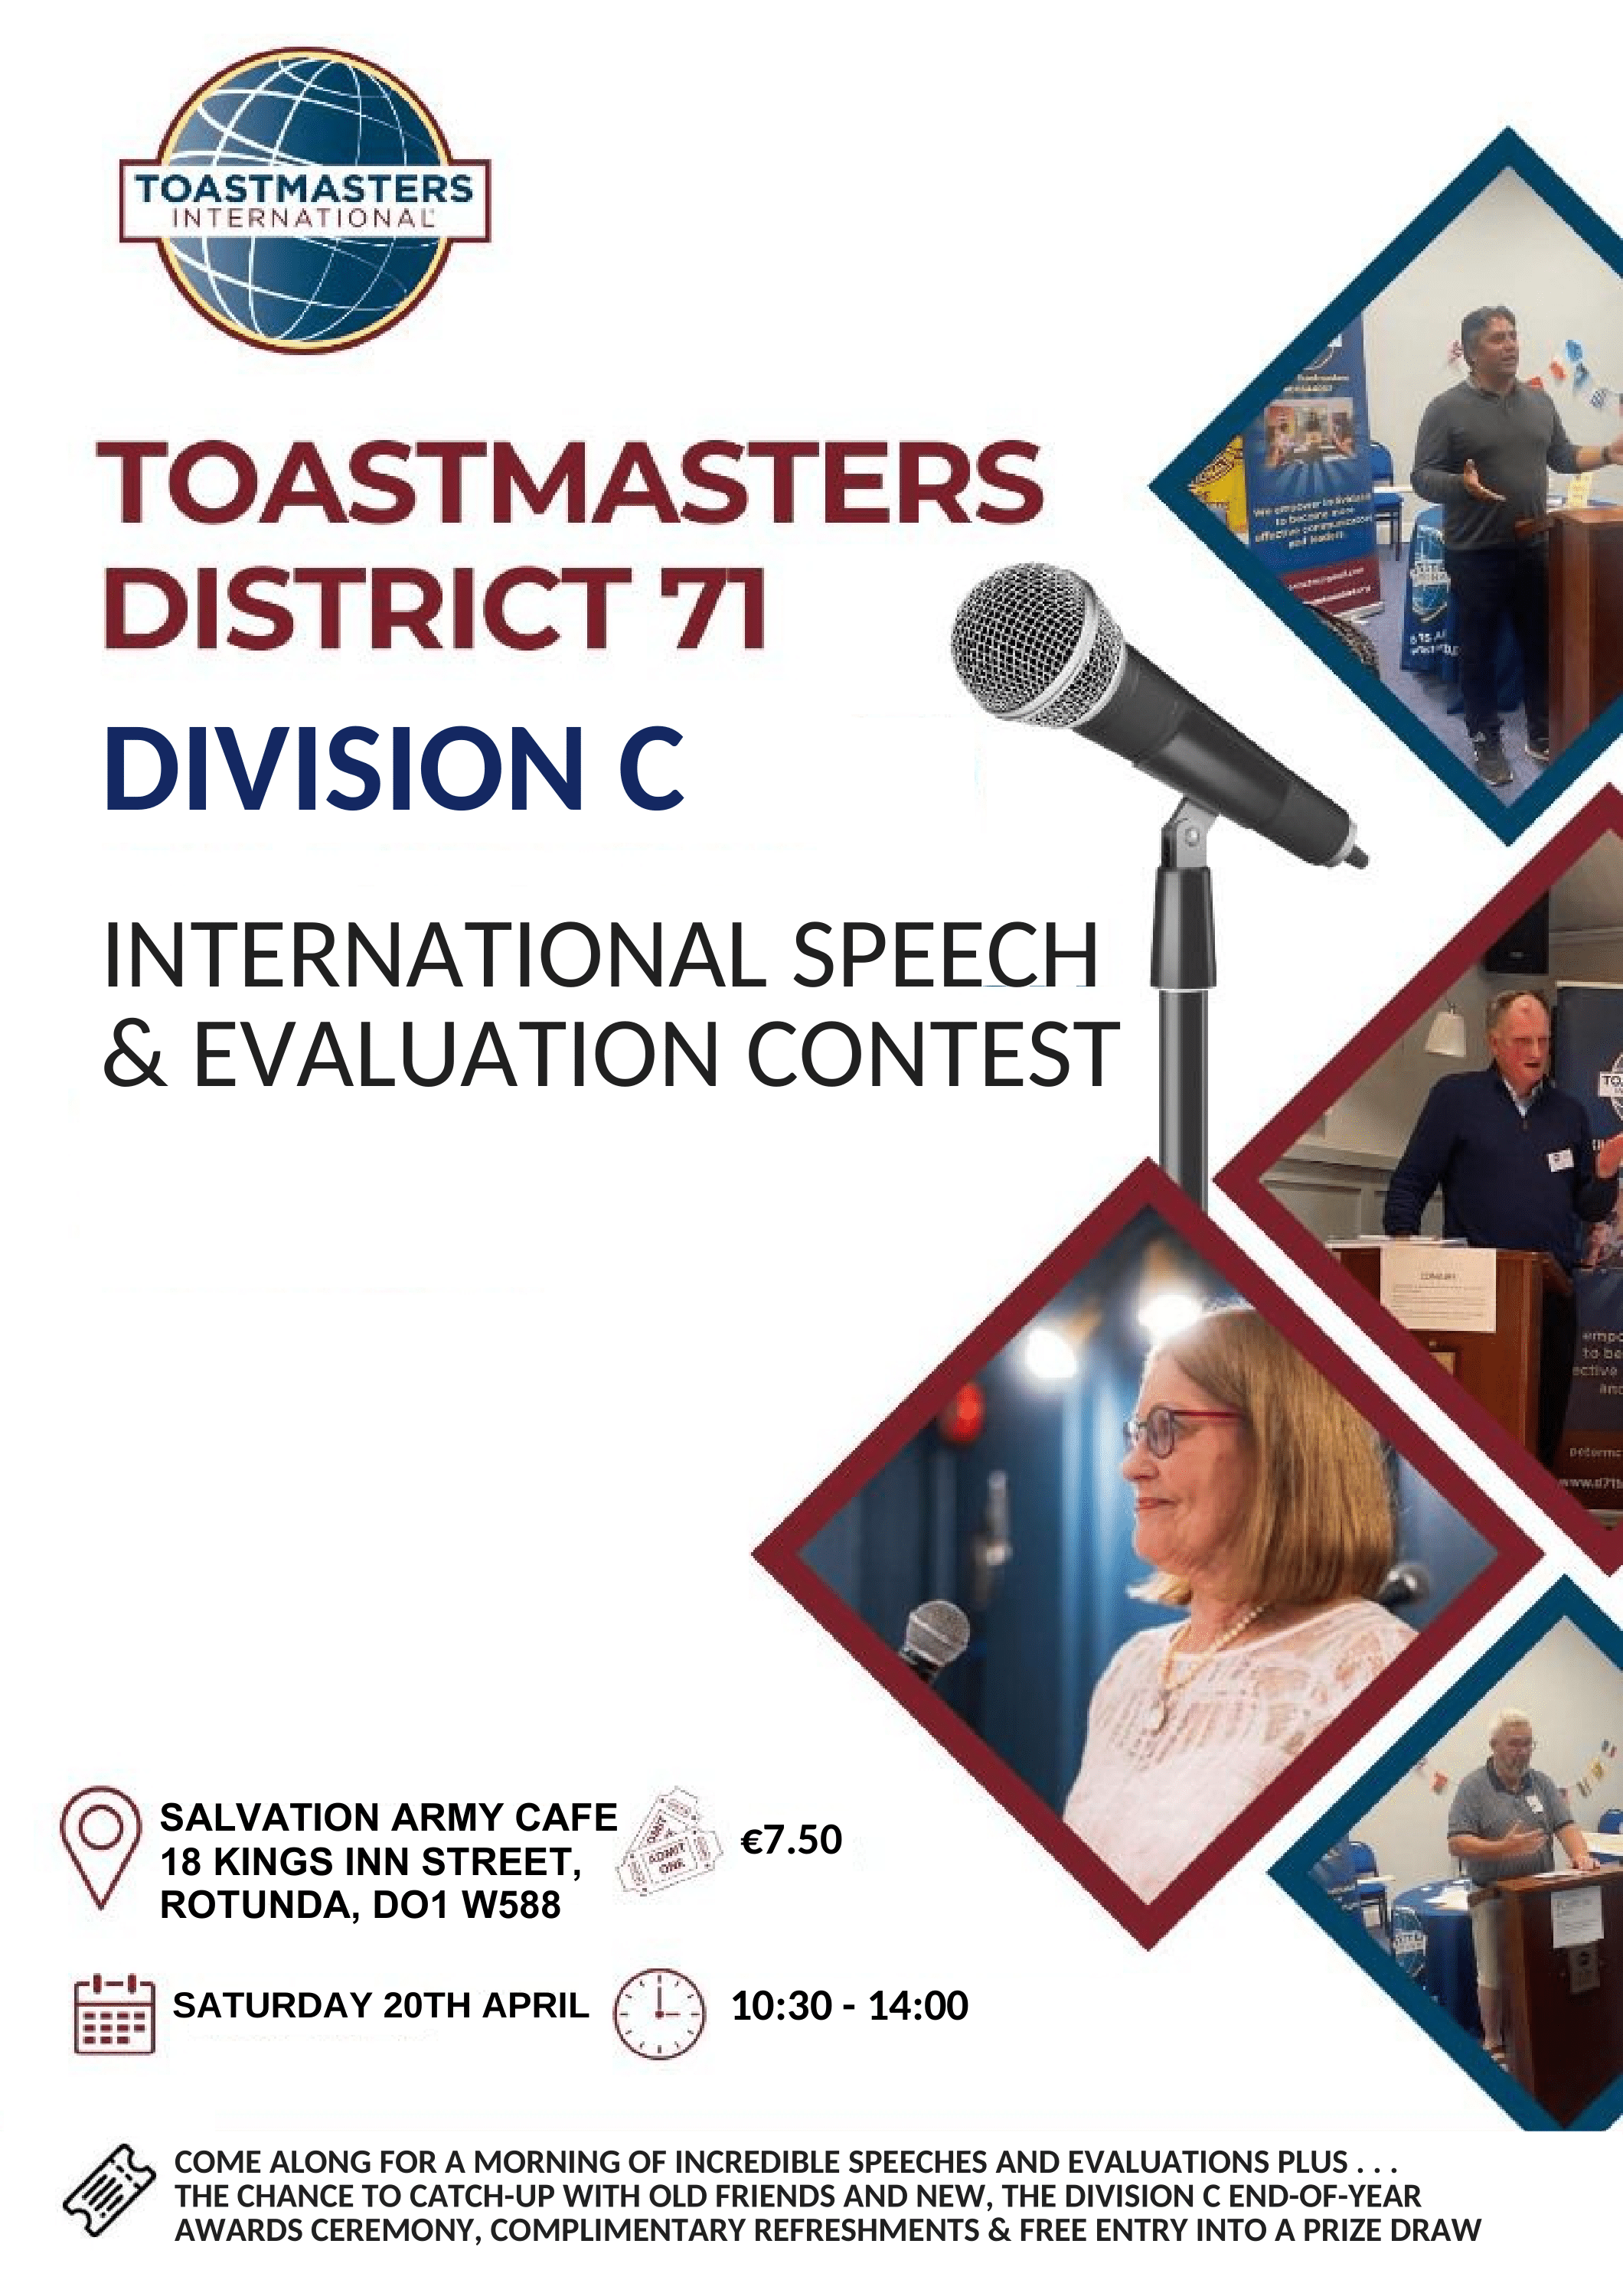 Division C International Speech and Evaluation Contest